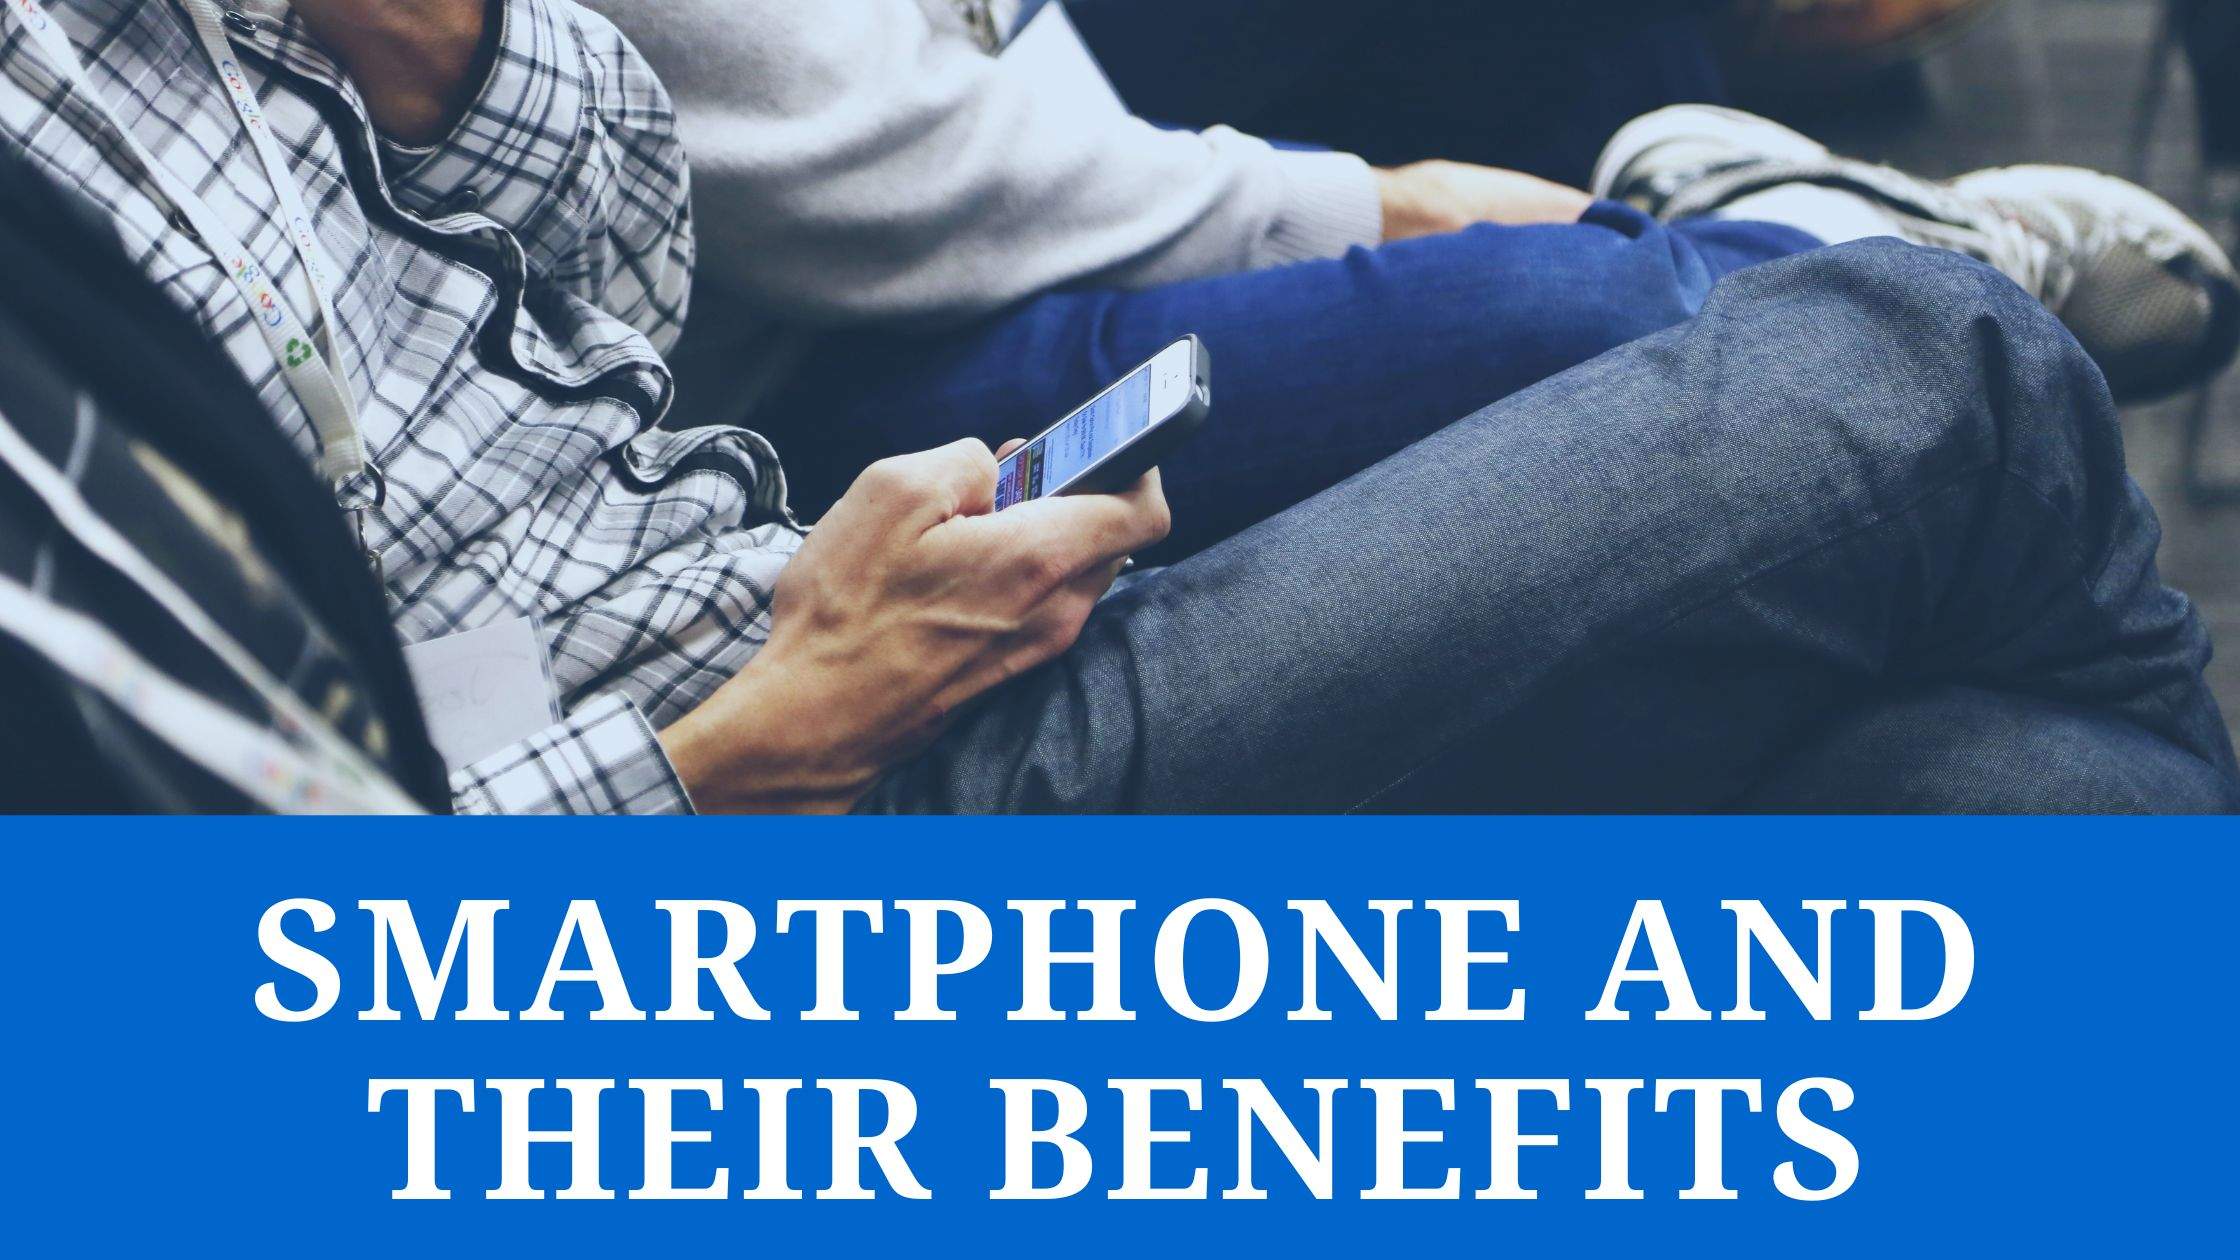 Smartphone and its Benefits in our daily lives